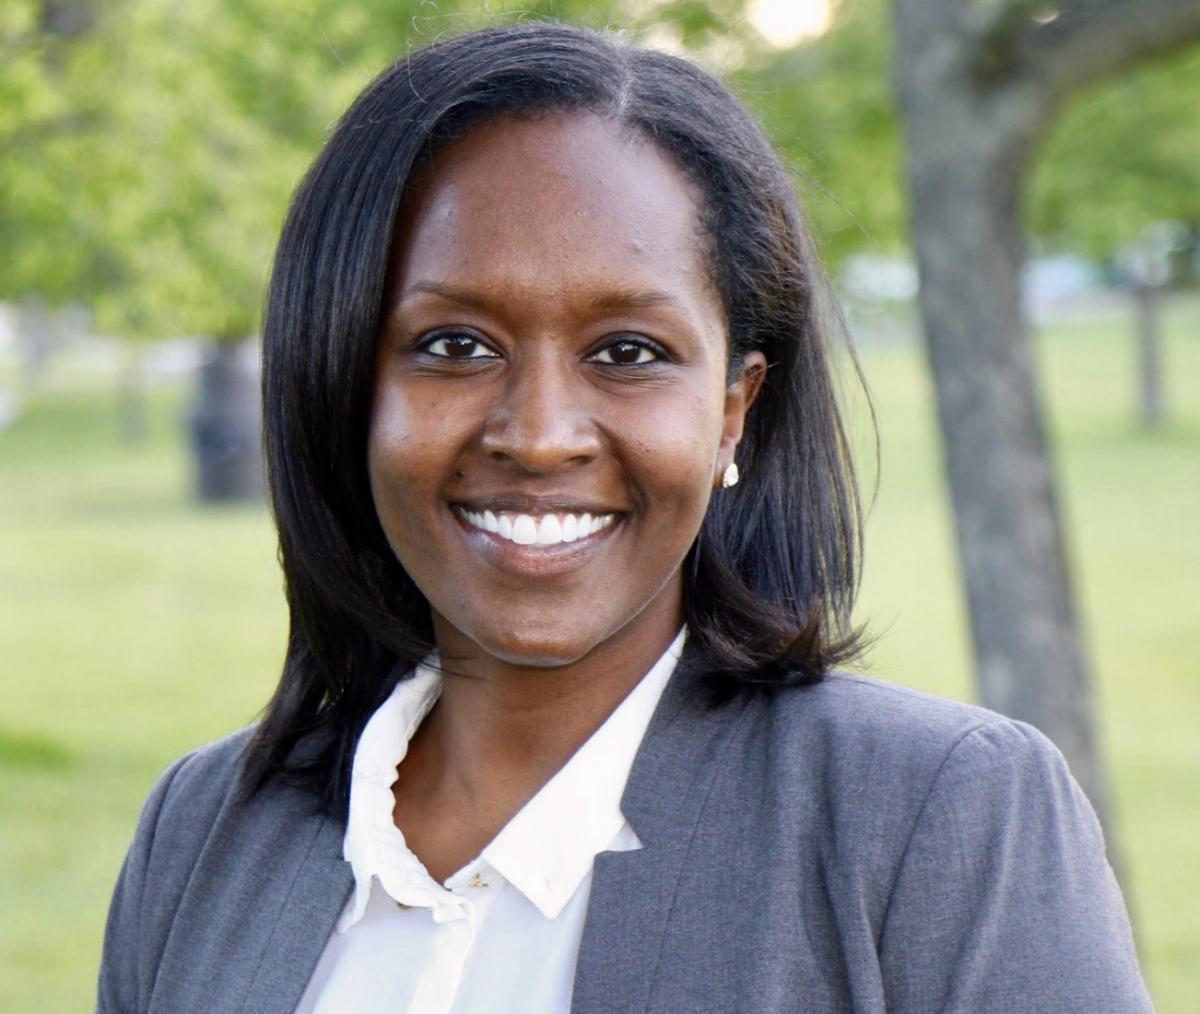 Dr. Meseret Hailu in a white collared shirt and grey blazer outside in grass with trees